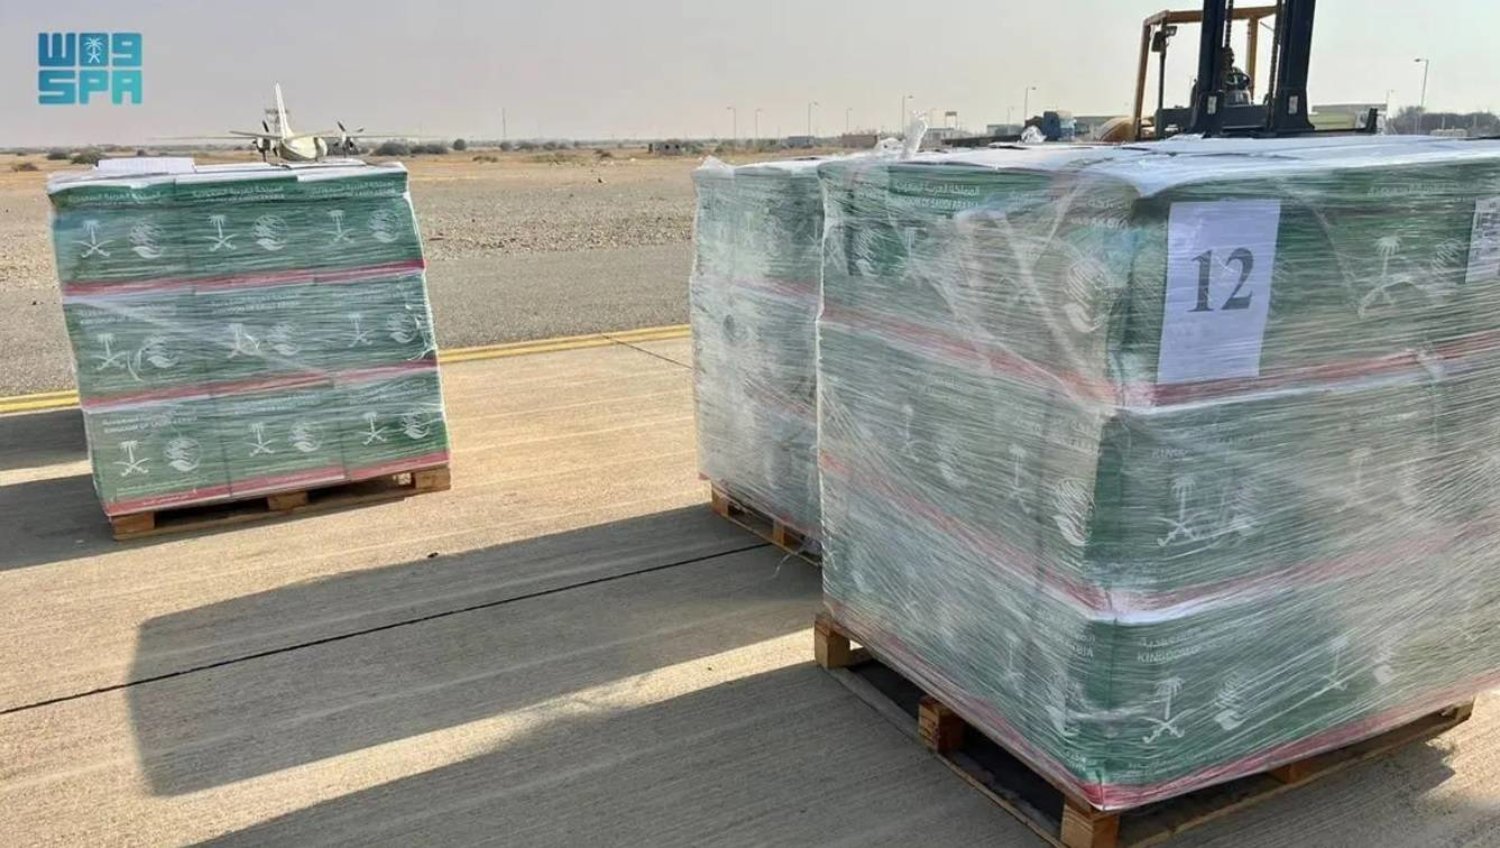 The aid is part of the Saudi relief airlift operated by KSrelief to help the Sudanese people. SPA